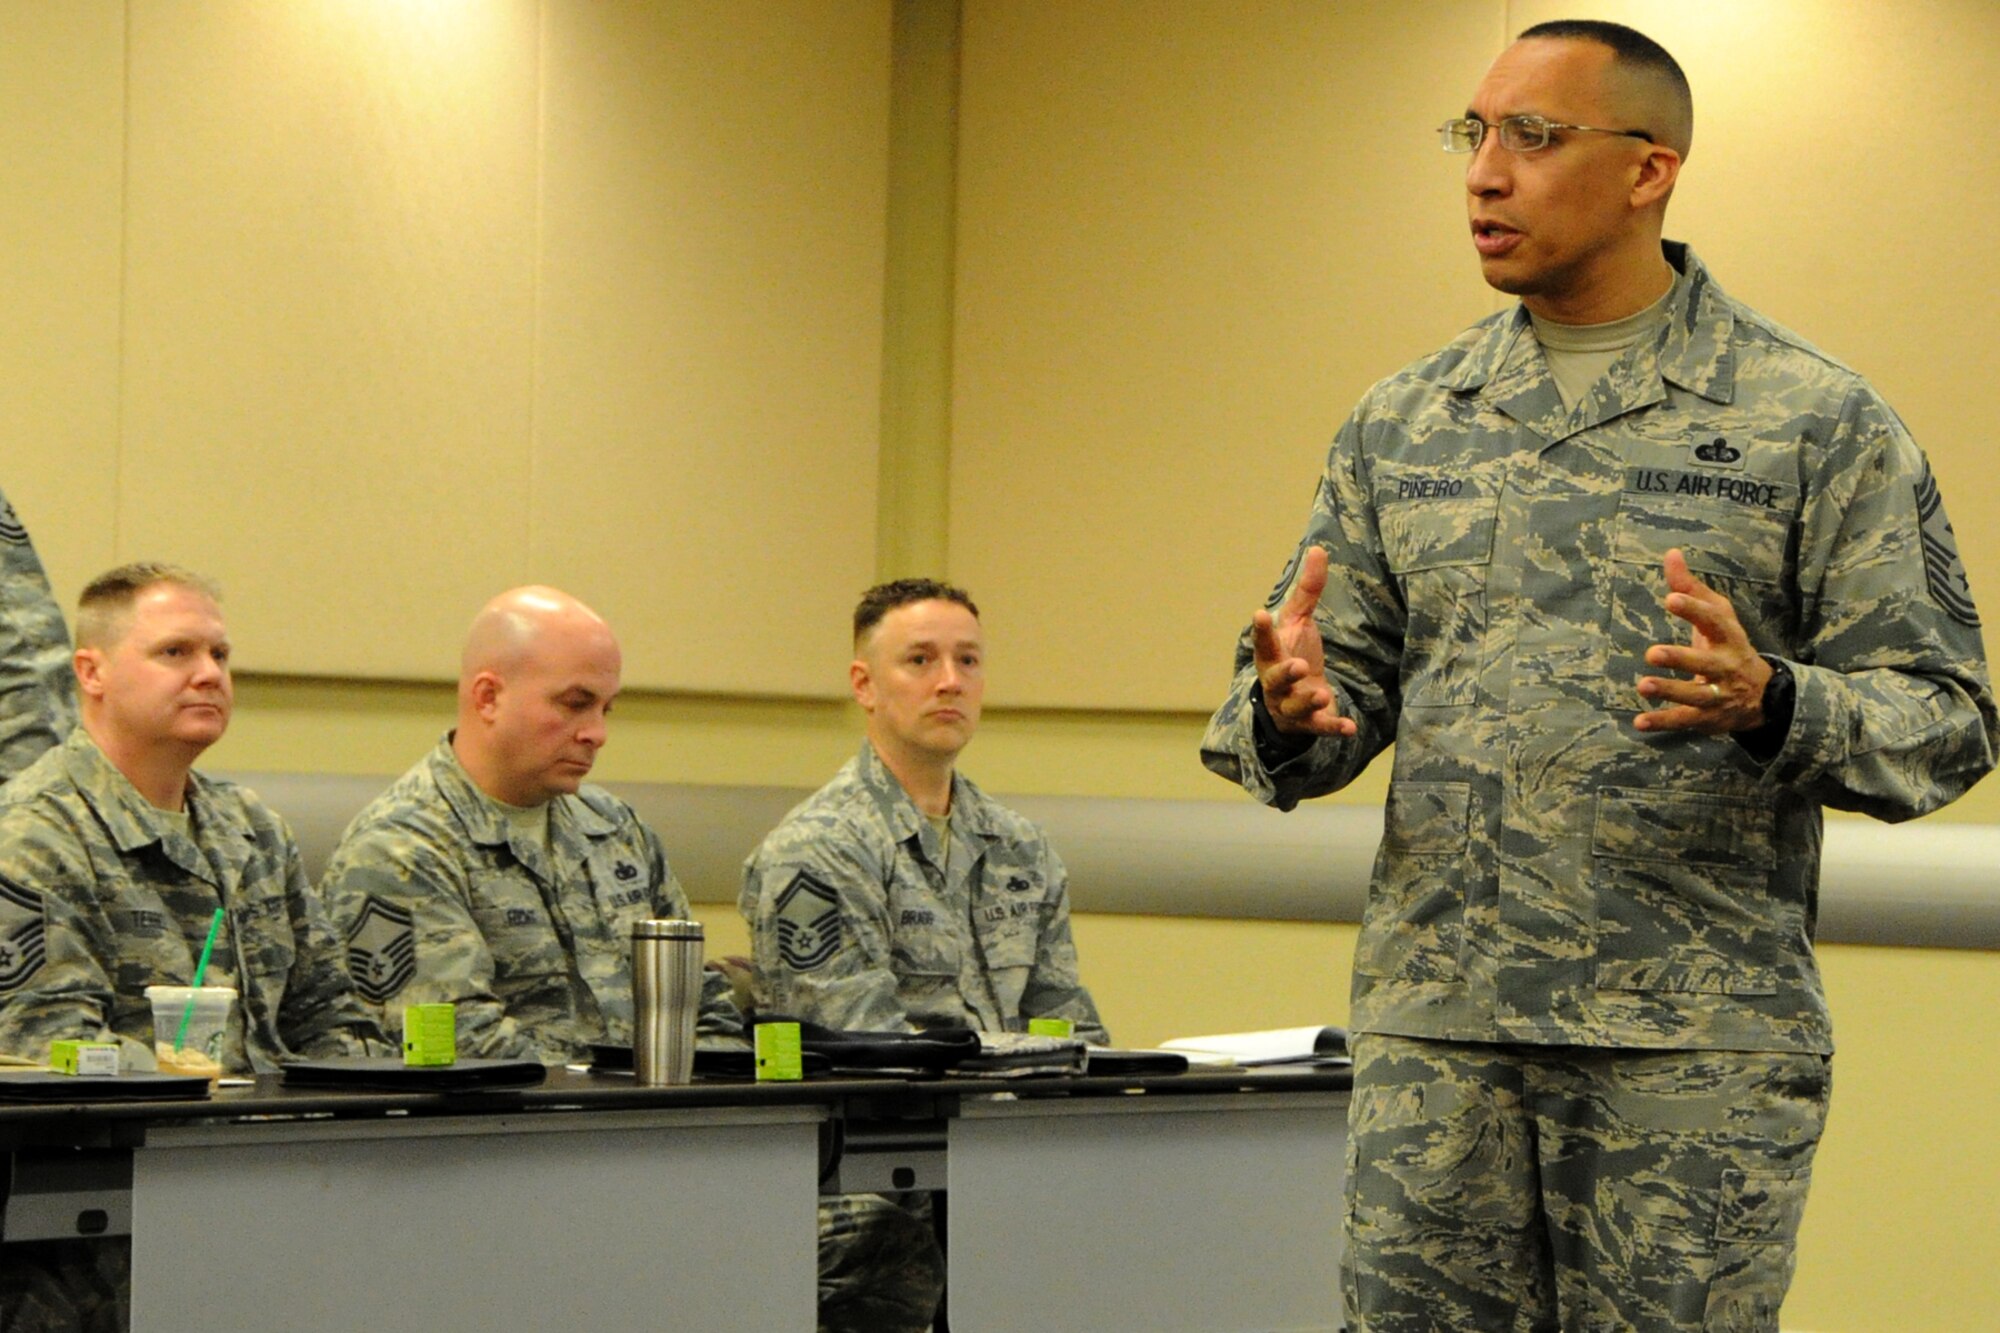 Air Force District of Washington First Sergeant Chief Master Sgt. Manny Pineiro speaks to the newest chief master sergeants from the National Capital Region during the AFDW’s Chief Orientation Course at Joint Base Andrews, Md., Feb. 29, 2016. Key Air Force leaders addressed the group reminding them of the increased responsibility they now have for their Airmen and the force. (U.S. Air Force photo/Tech. Sgt. Matt Davis)